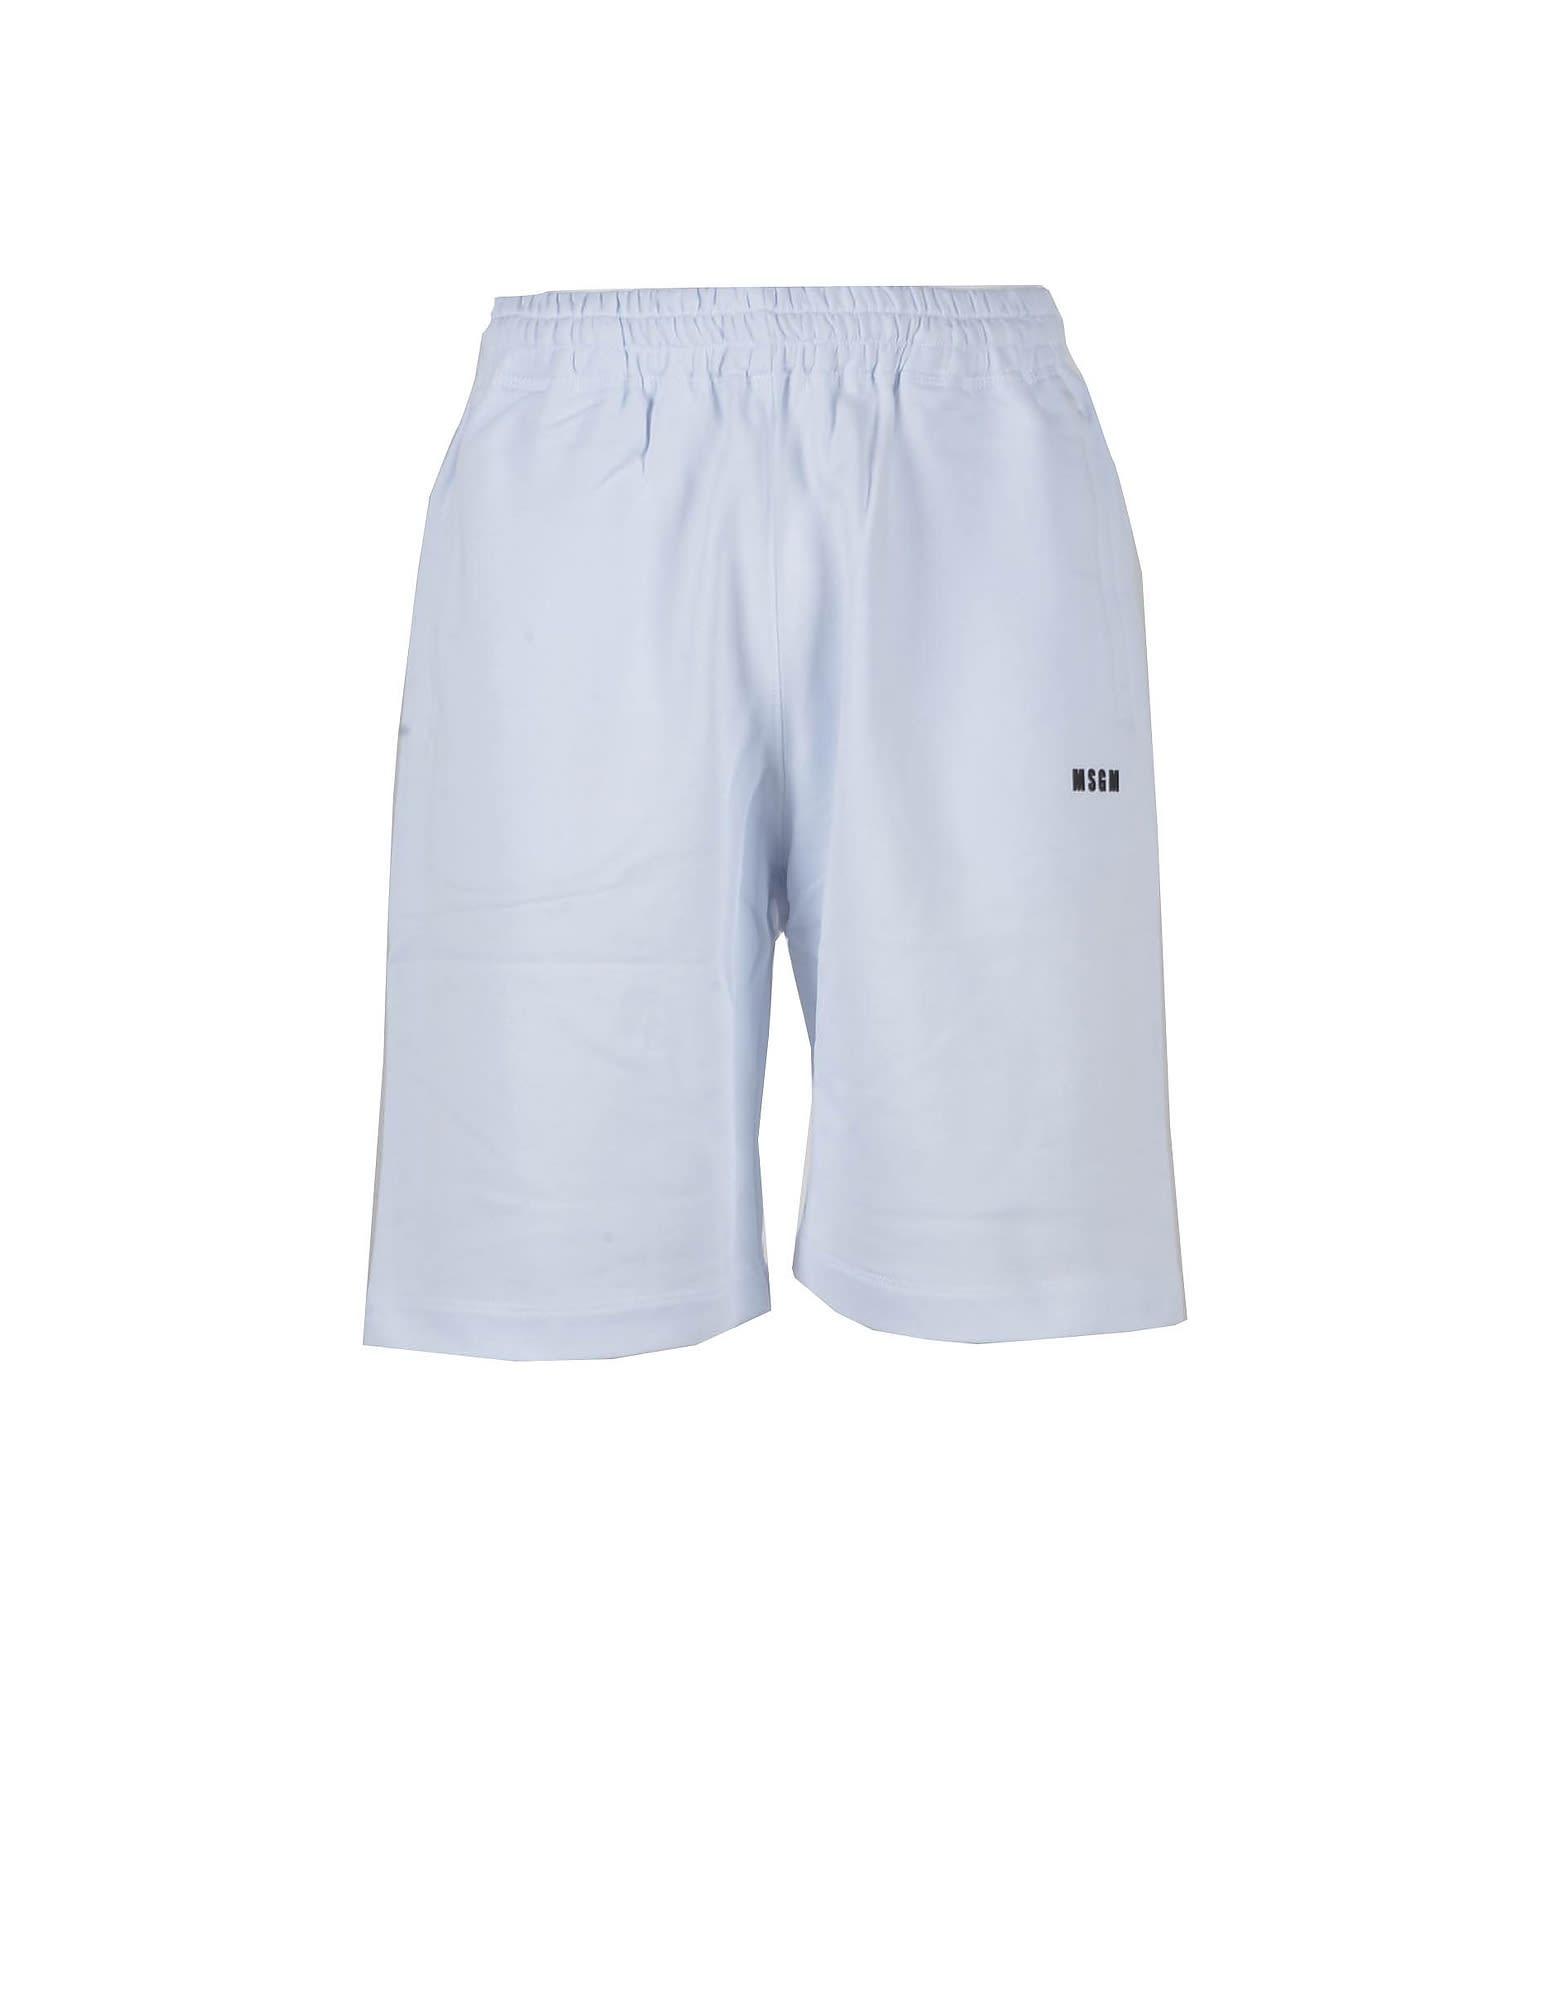 MSGM Ss Bermuda Shorts in White for Men - Save 2% | Lyst